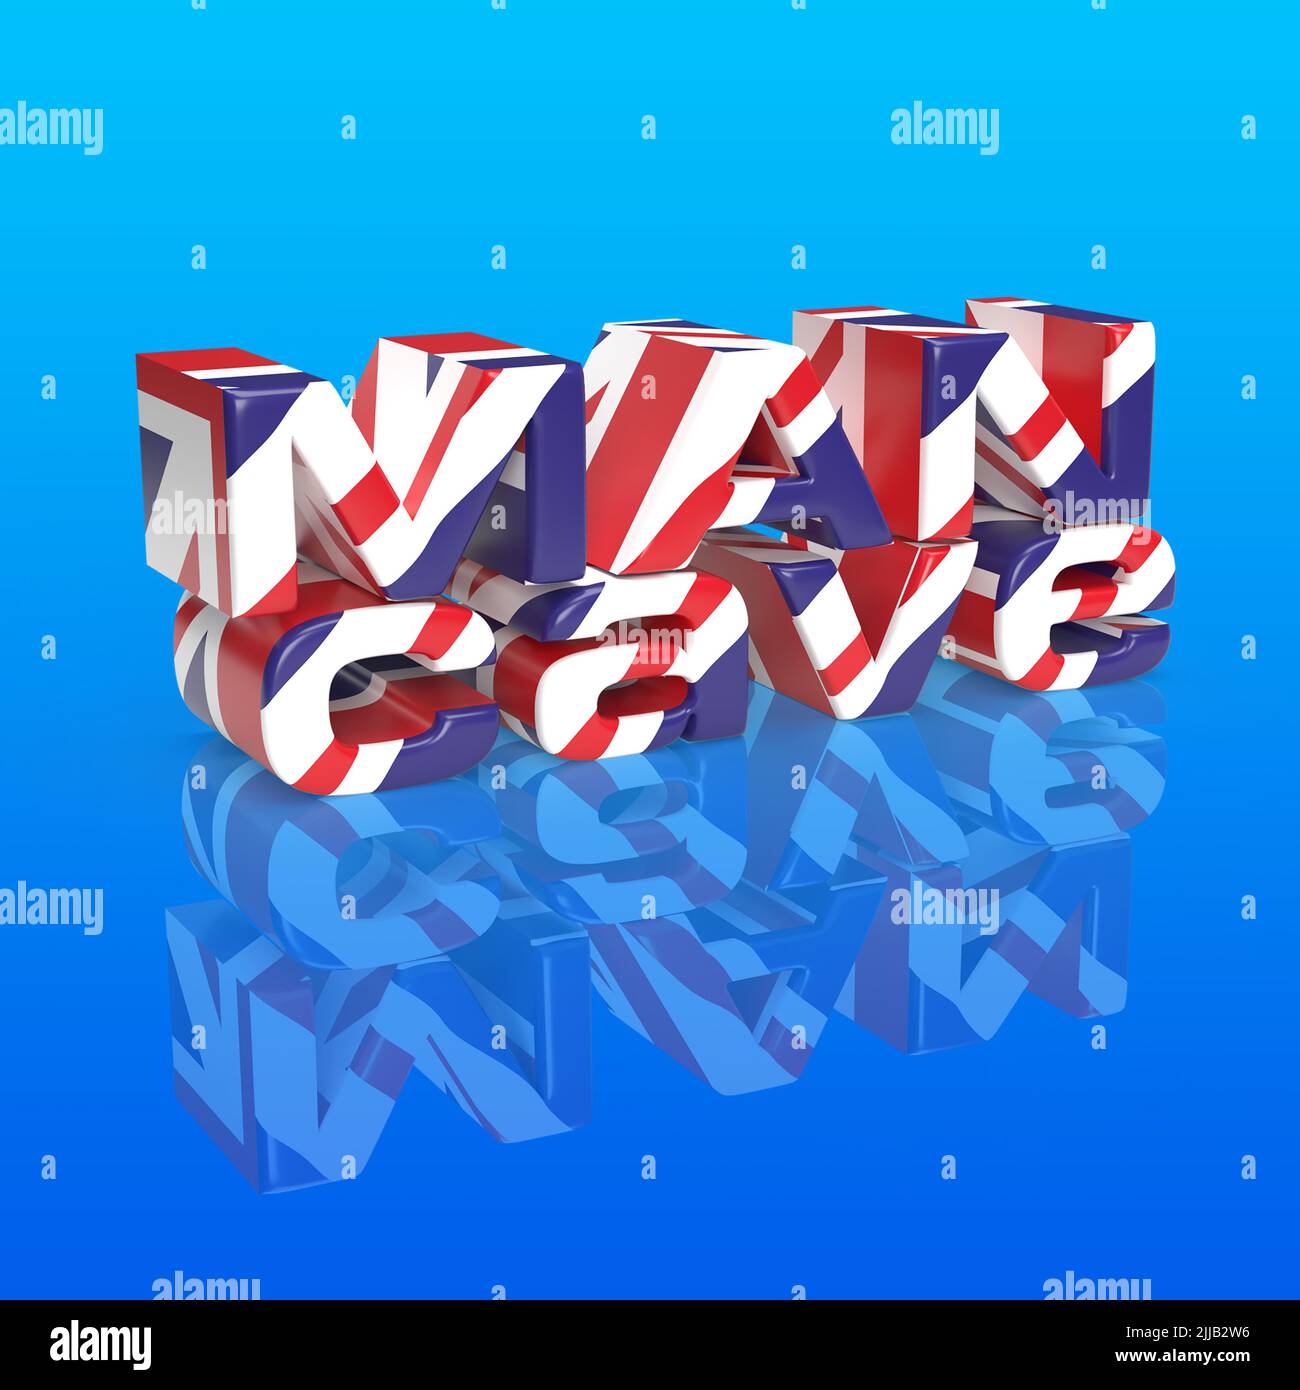 Man Cave 3D Render with Union Jack on a blue background. Stock Photo